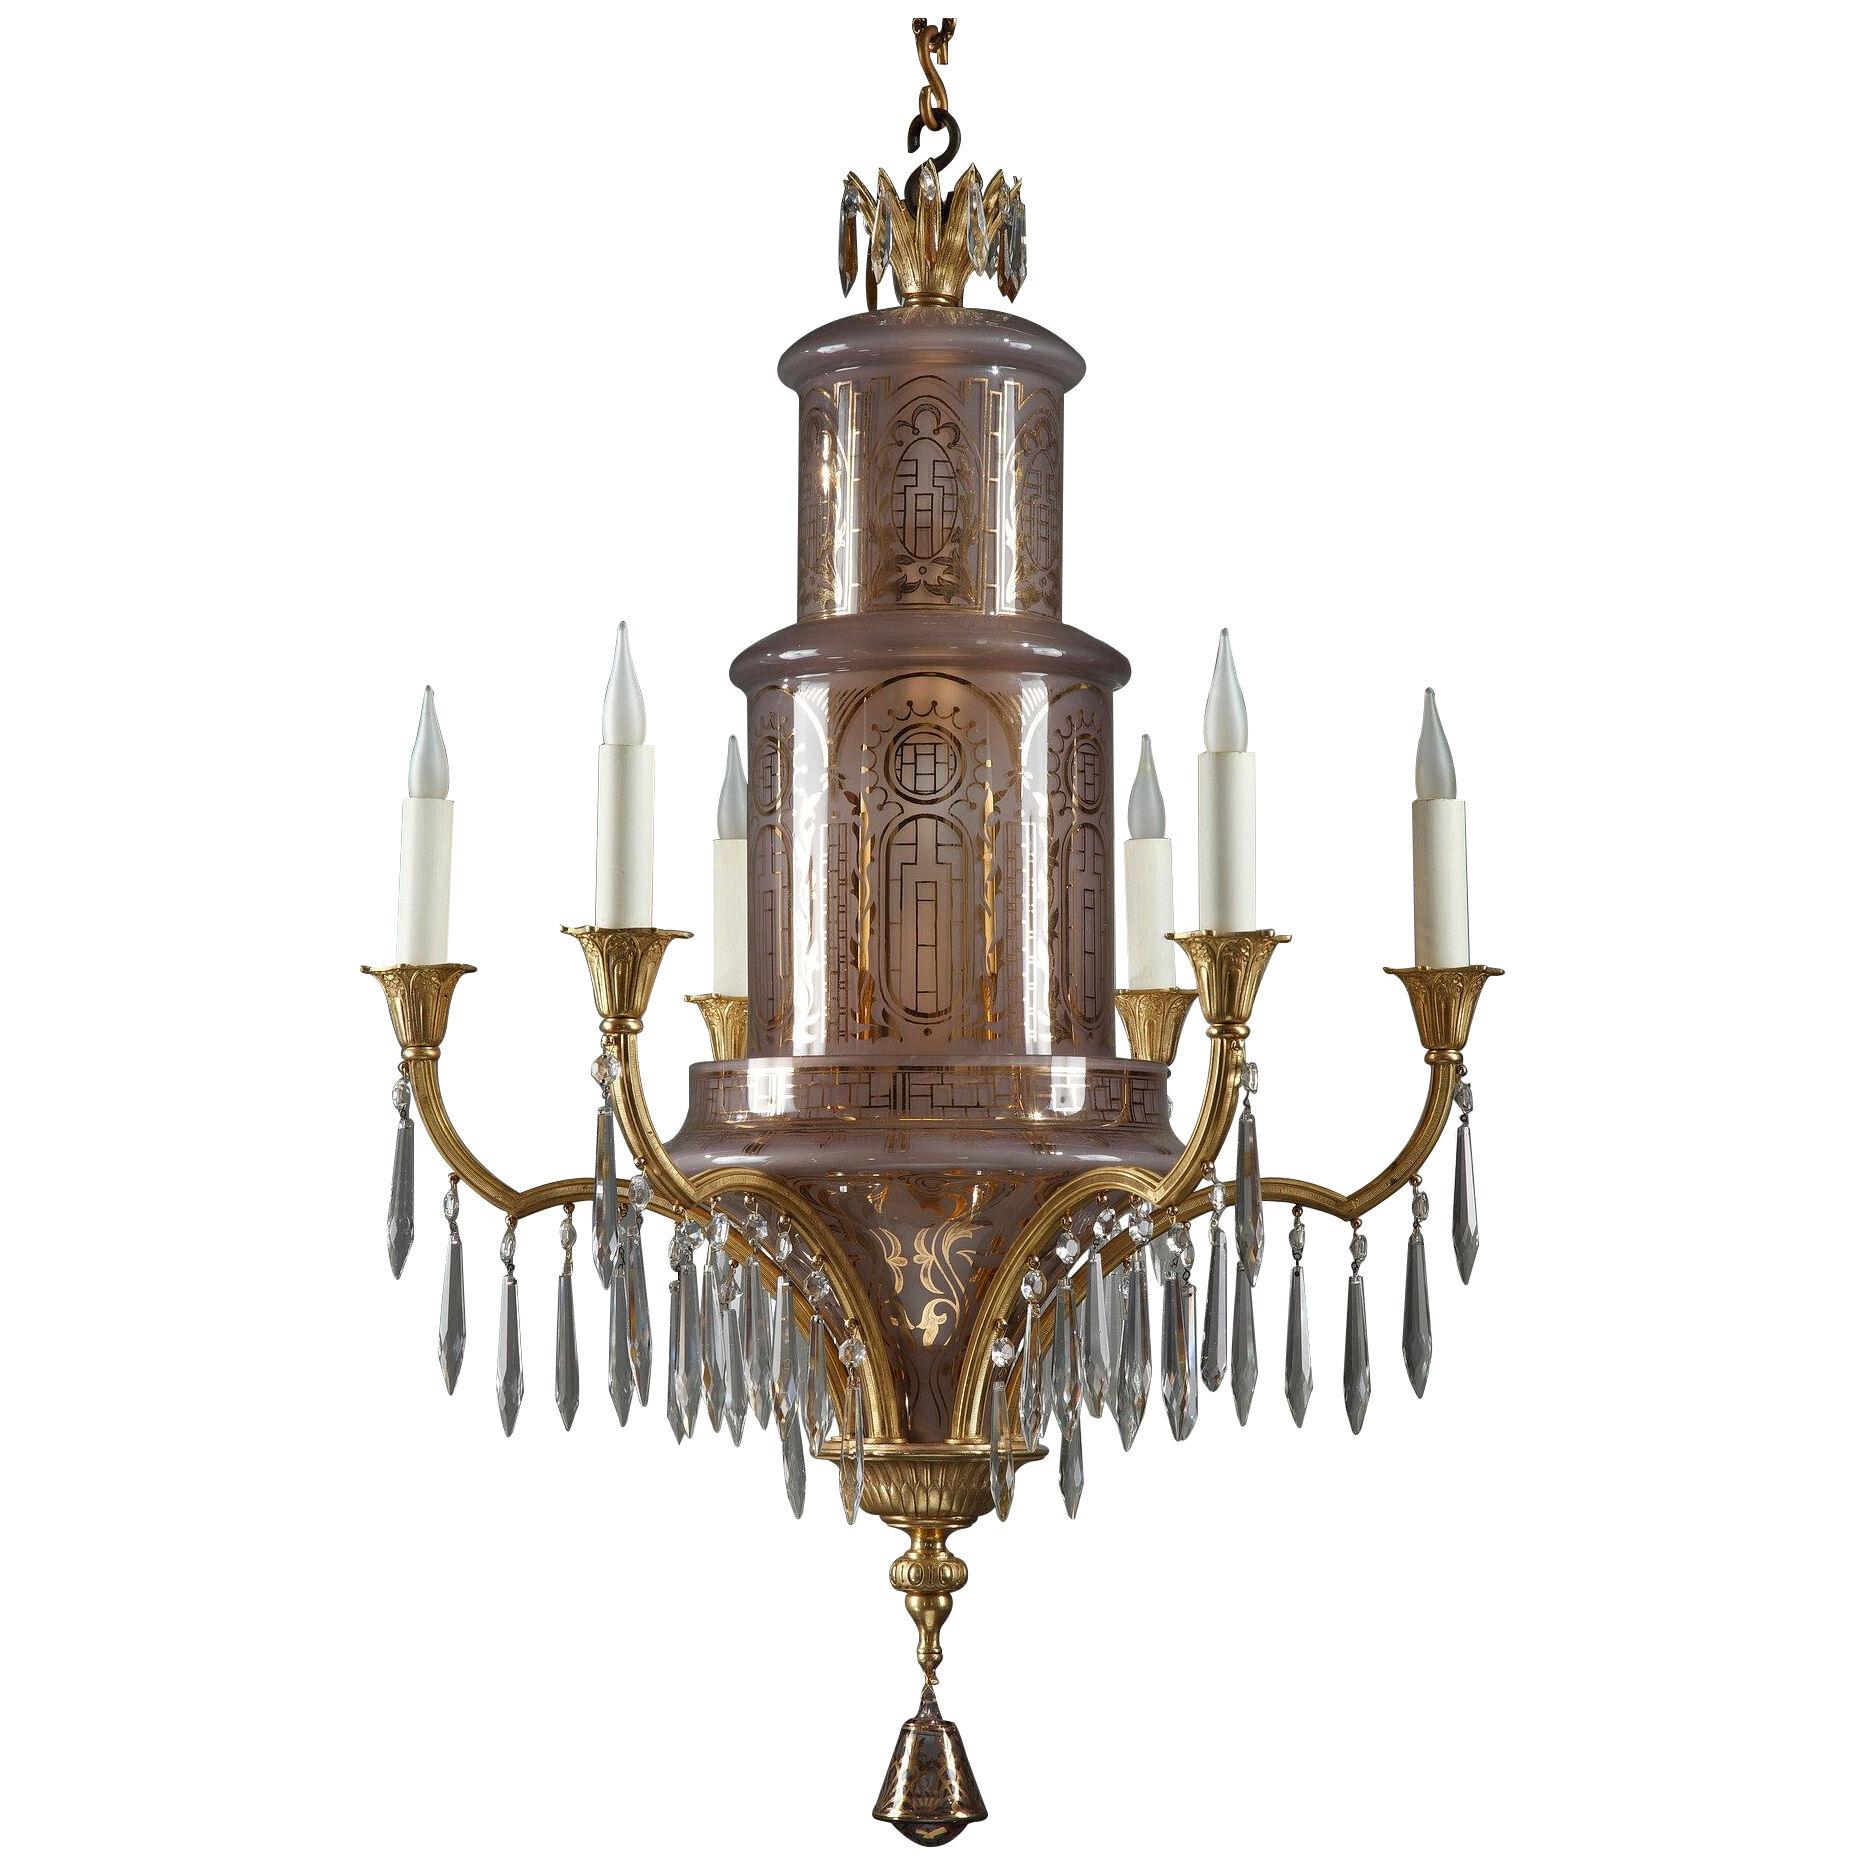 Orientalist Crystal and Gilded Bronze Chandelier, France, Circa 1900